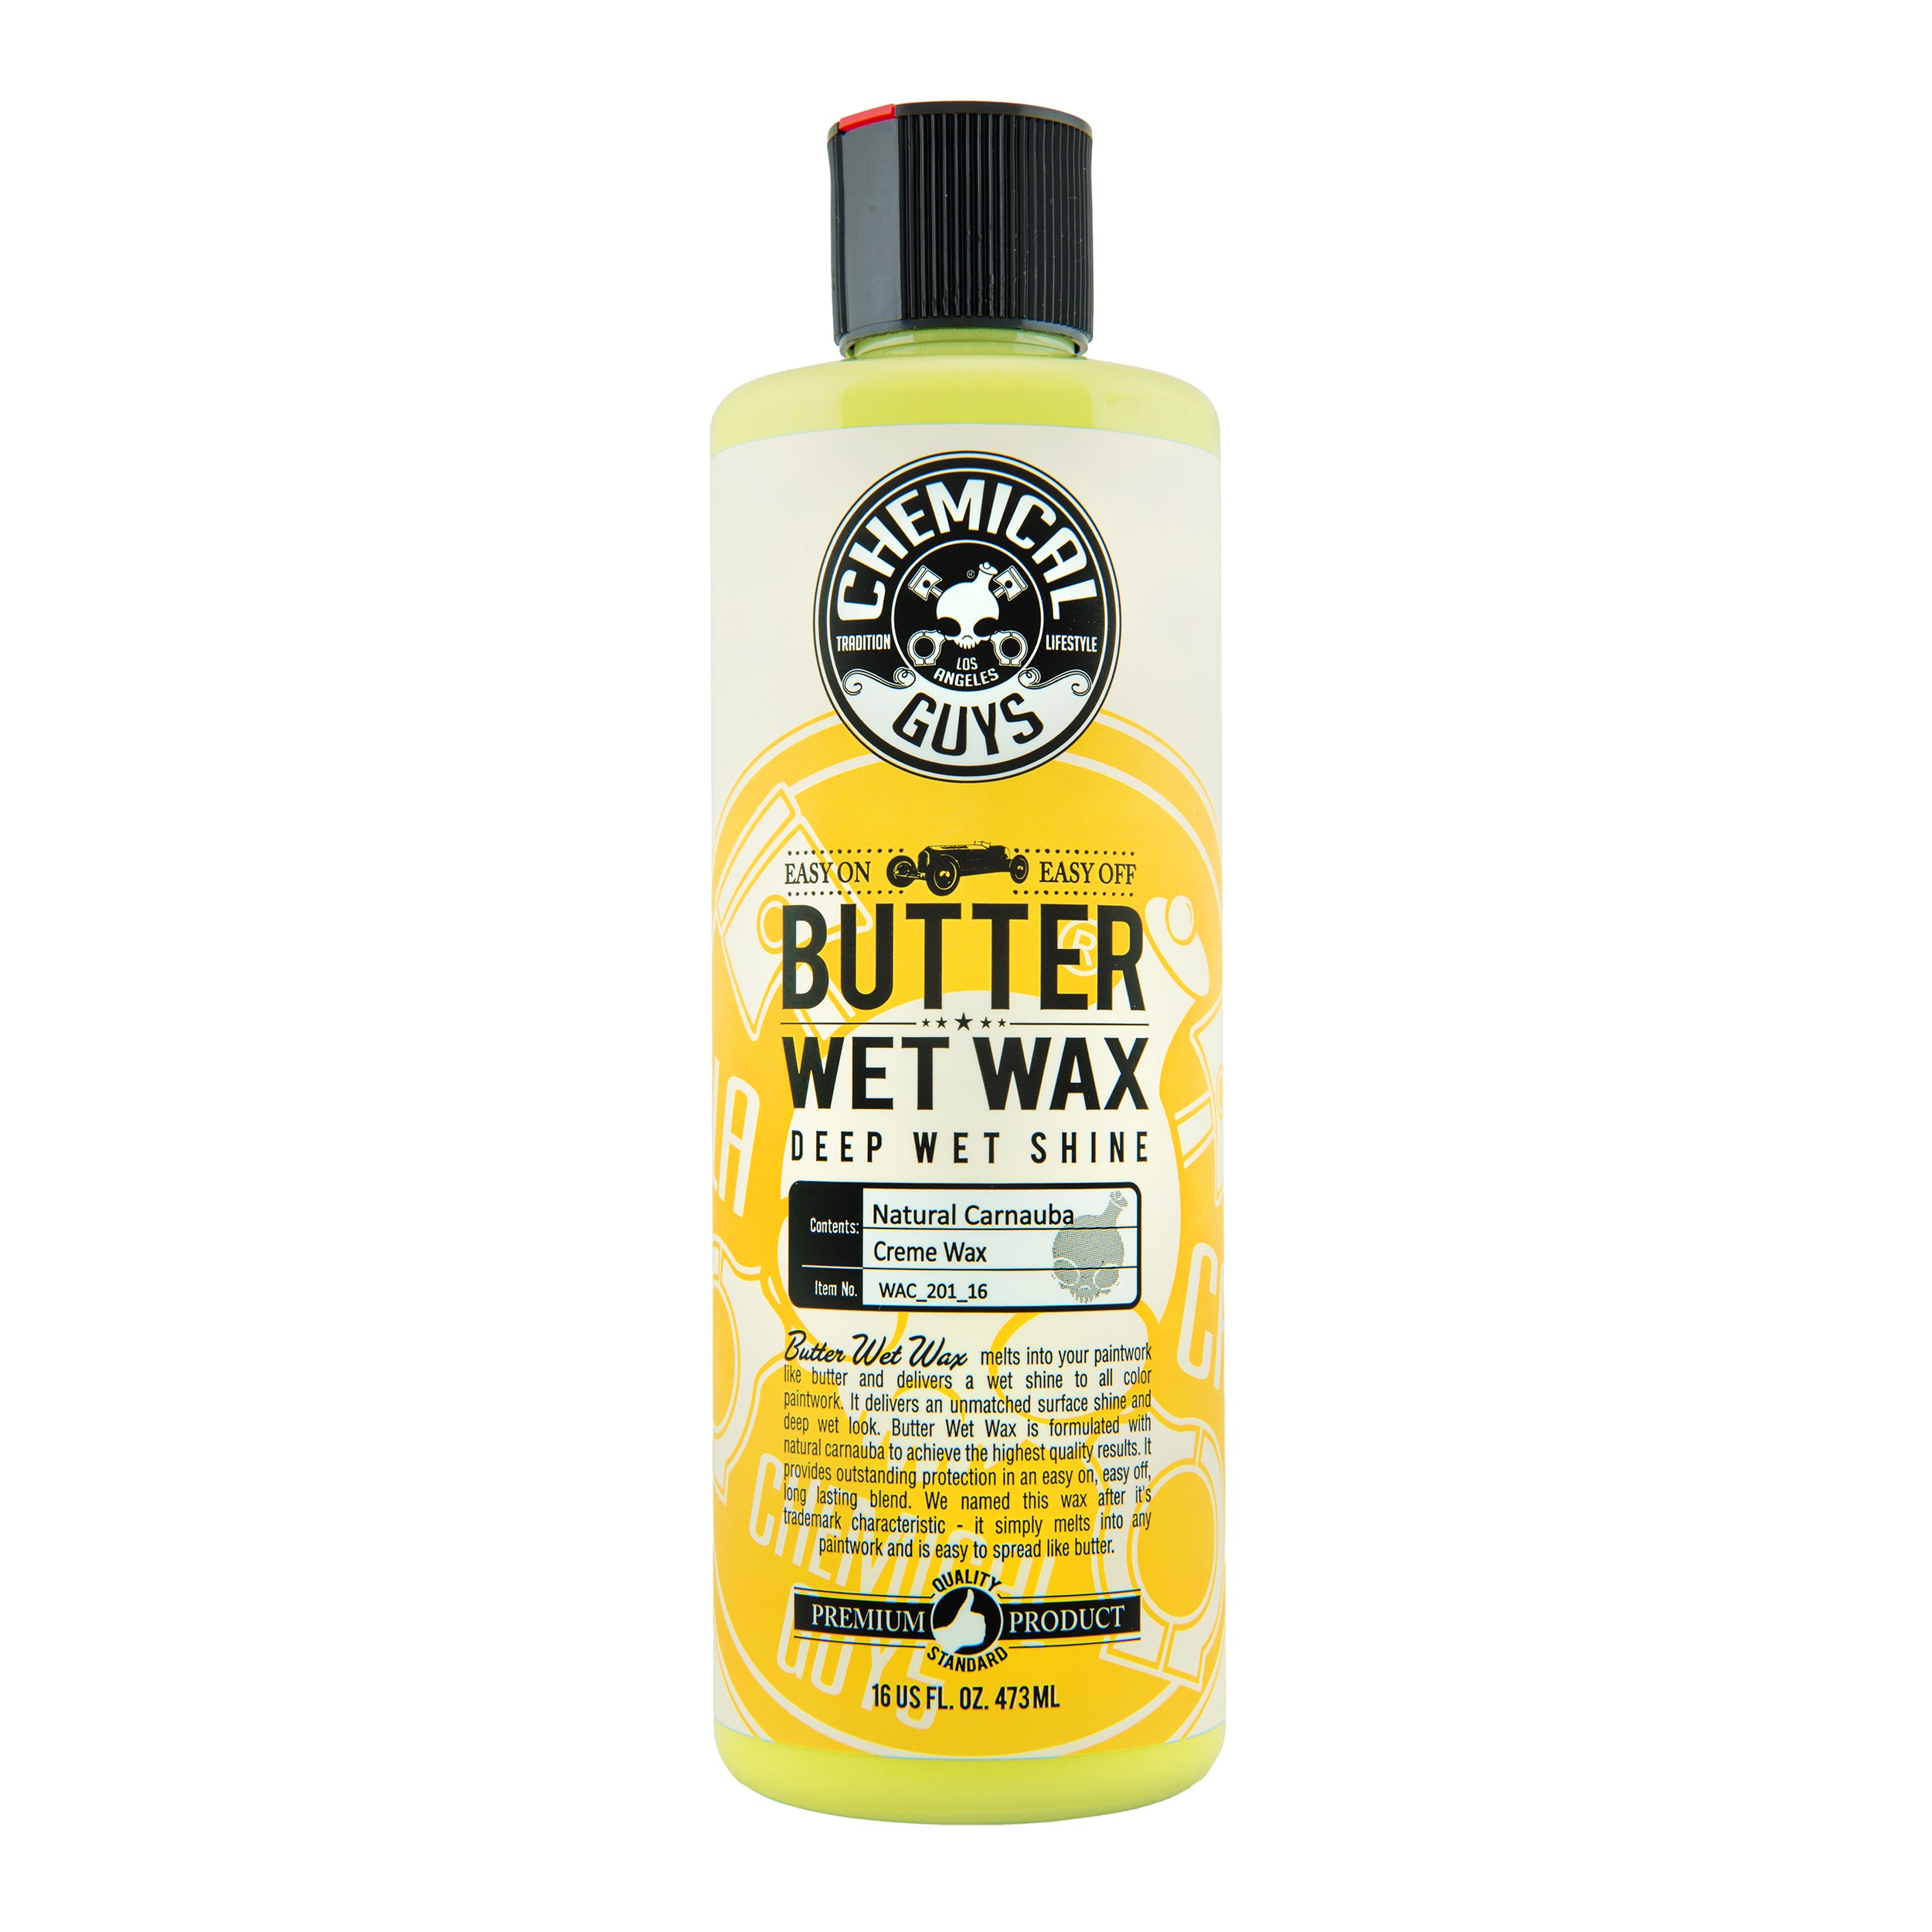 Butter wet wax!  Did you know that Butter Wet Wax has natural